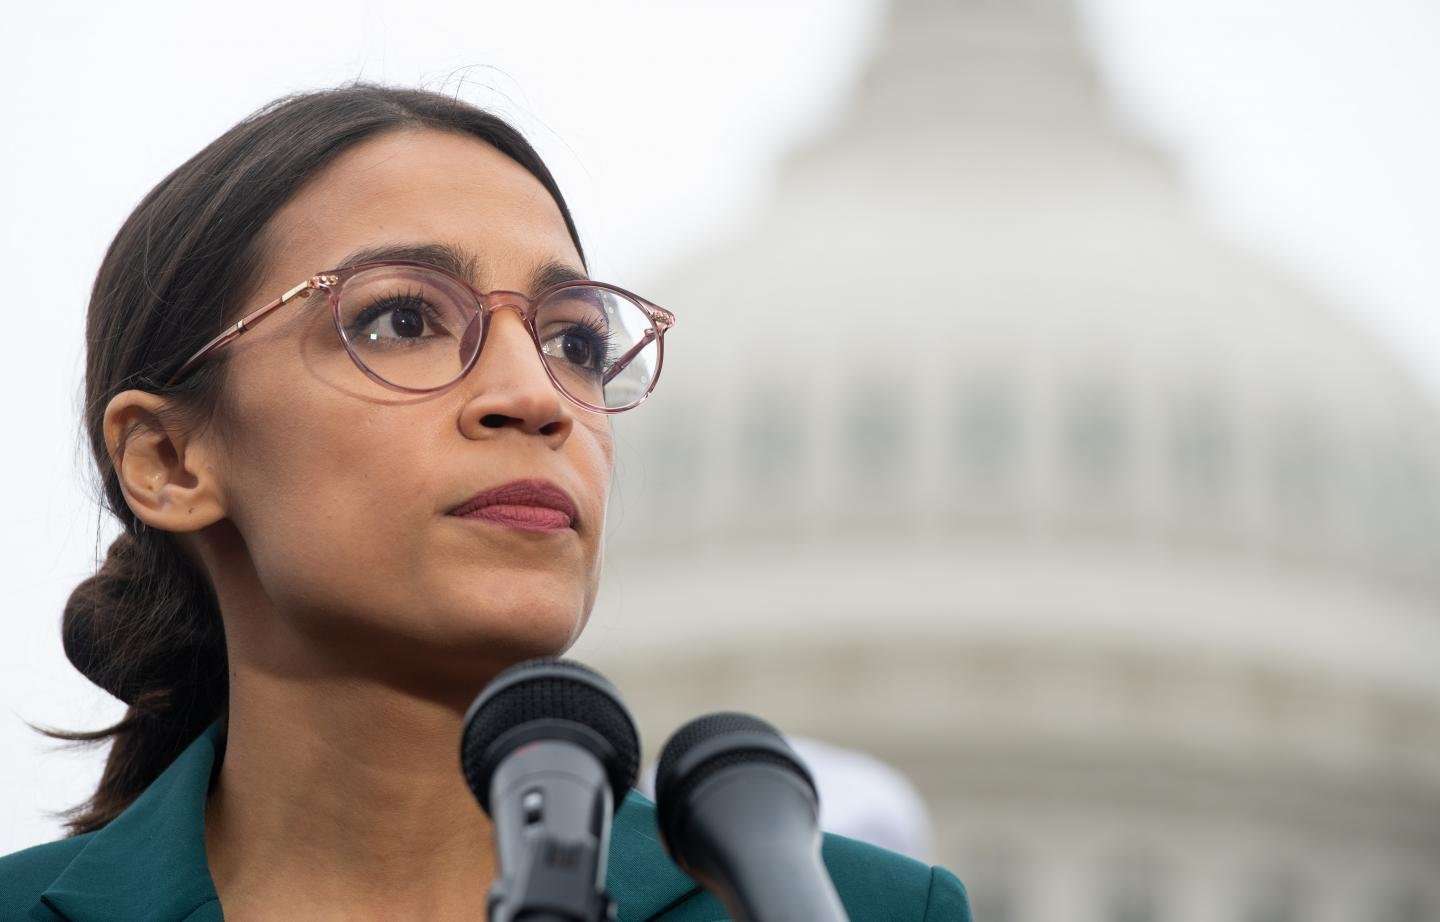 image for Alexandria Ocasio-Cortez Slams U.S. Inaction on Gun Control as Jacinda Ardern Bans Weapons: 'This Is What Leadership Looks Like'